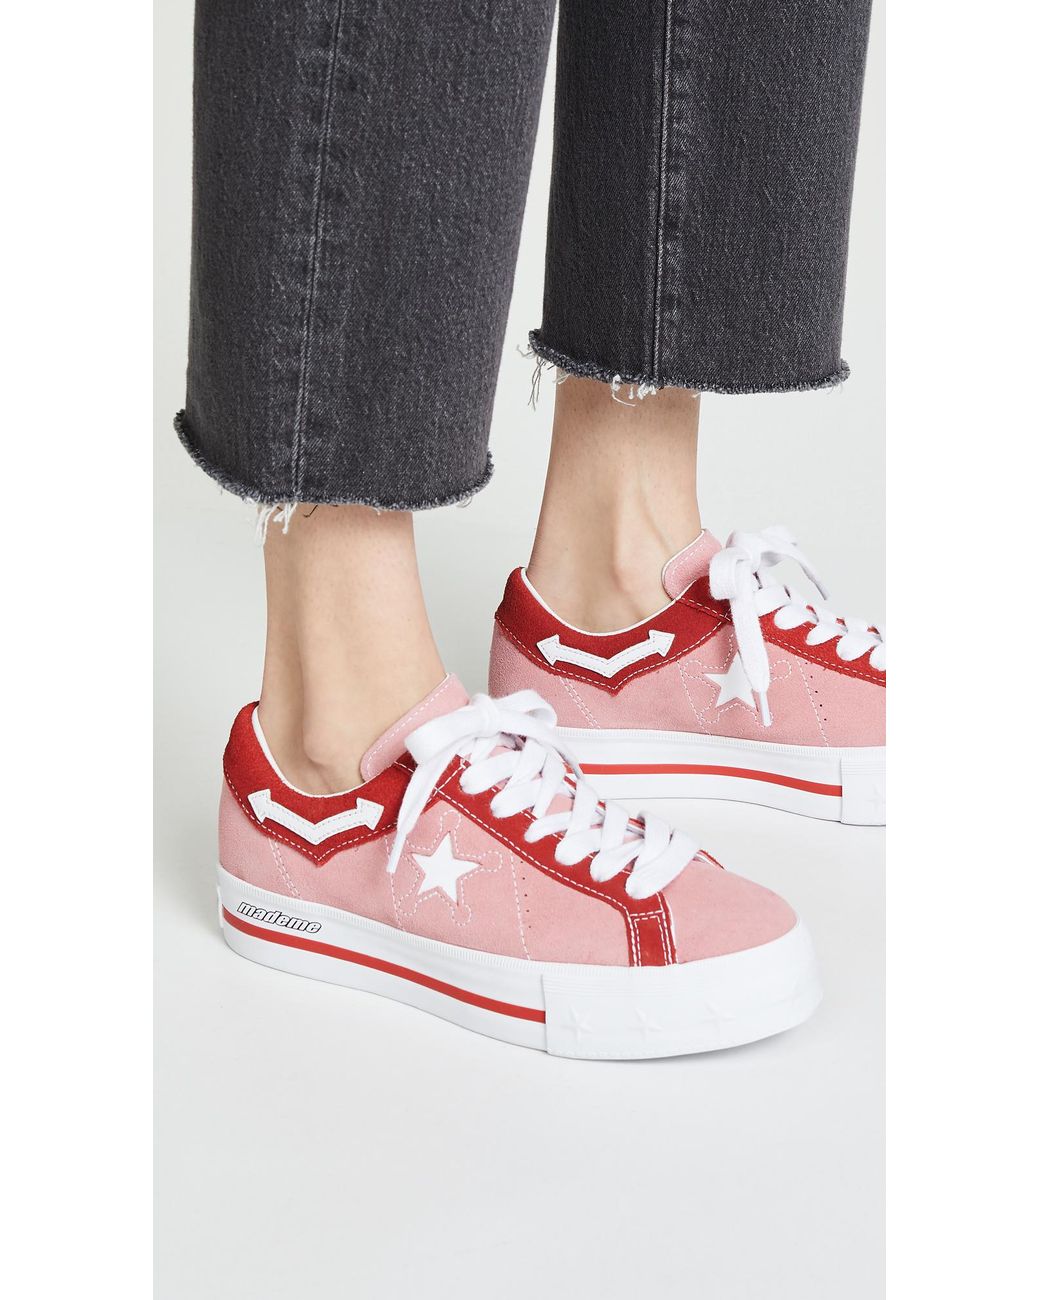 Converse X Mademe One Star Lift Platform Sneakers Pink | Lyst